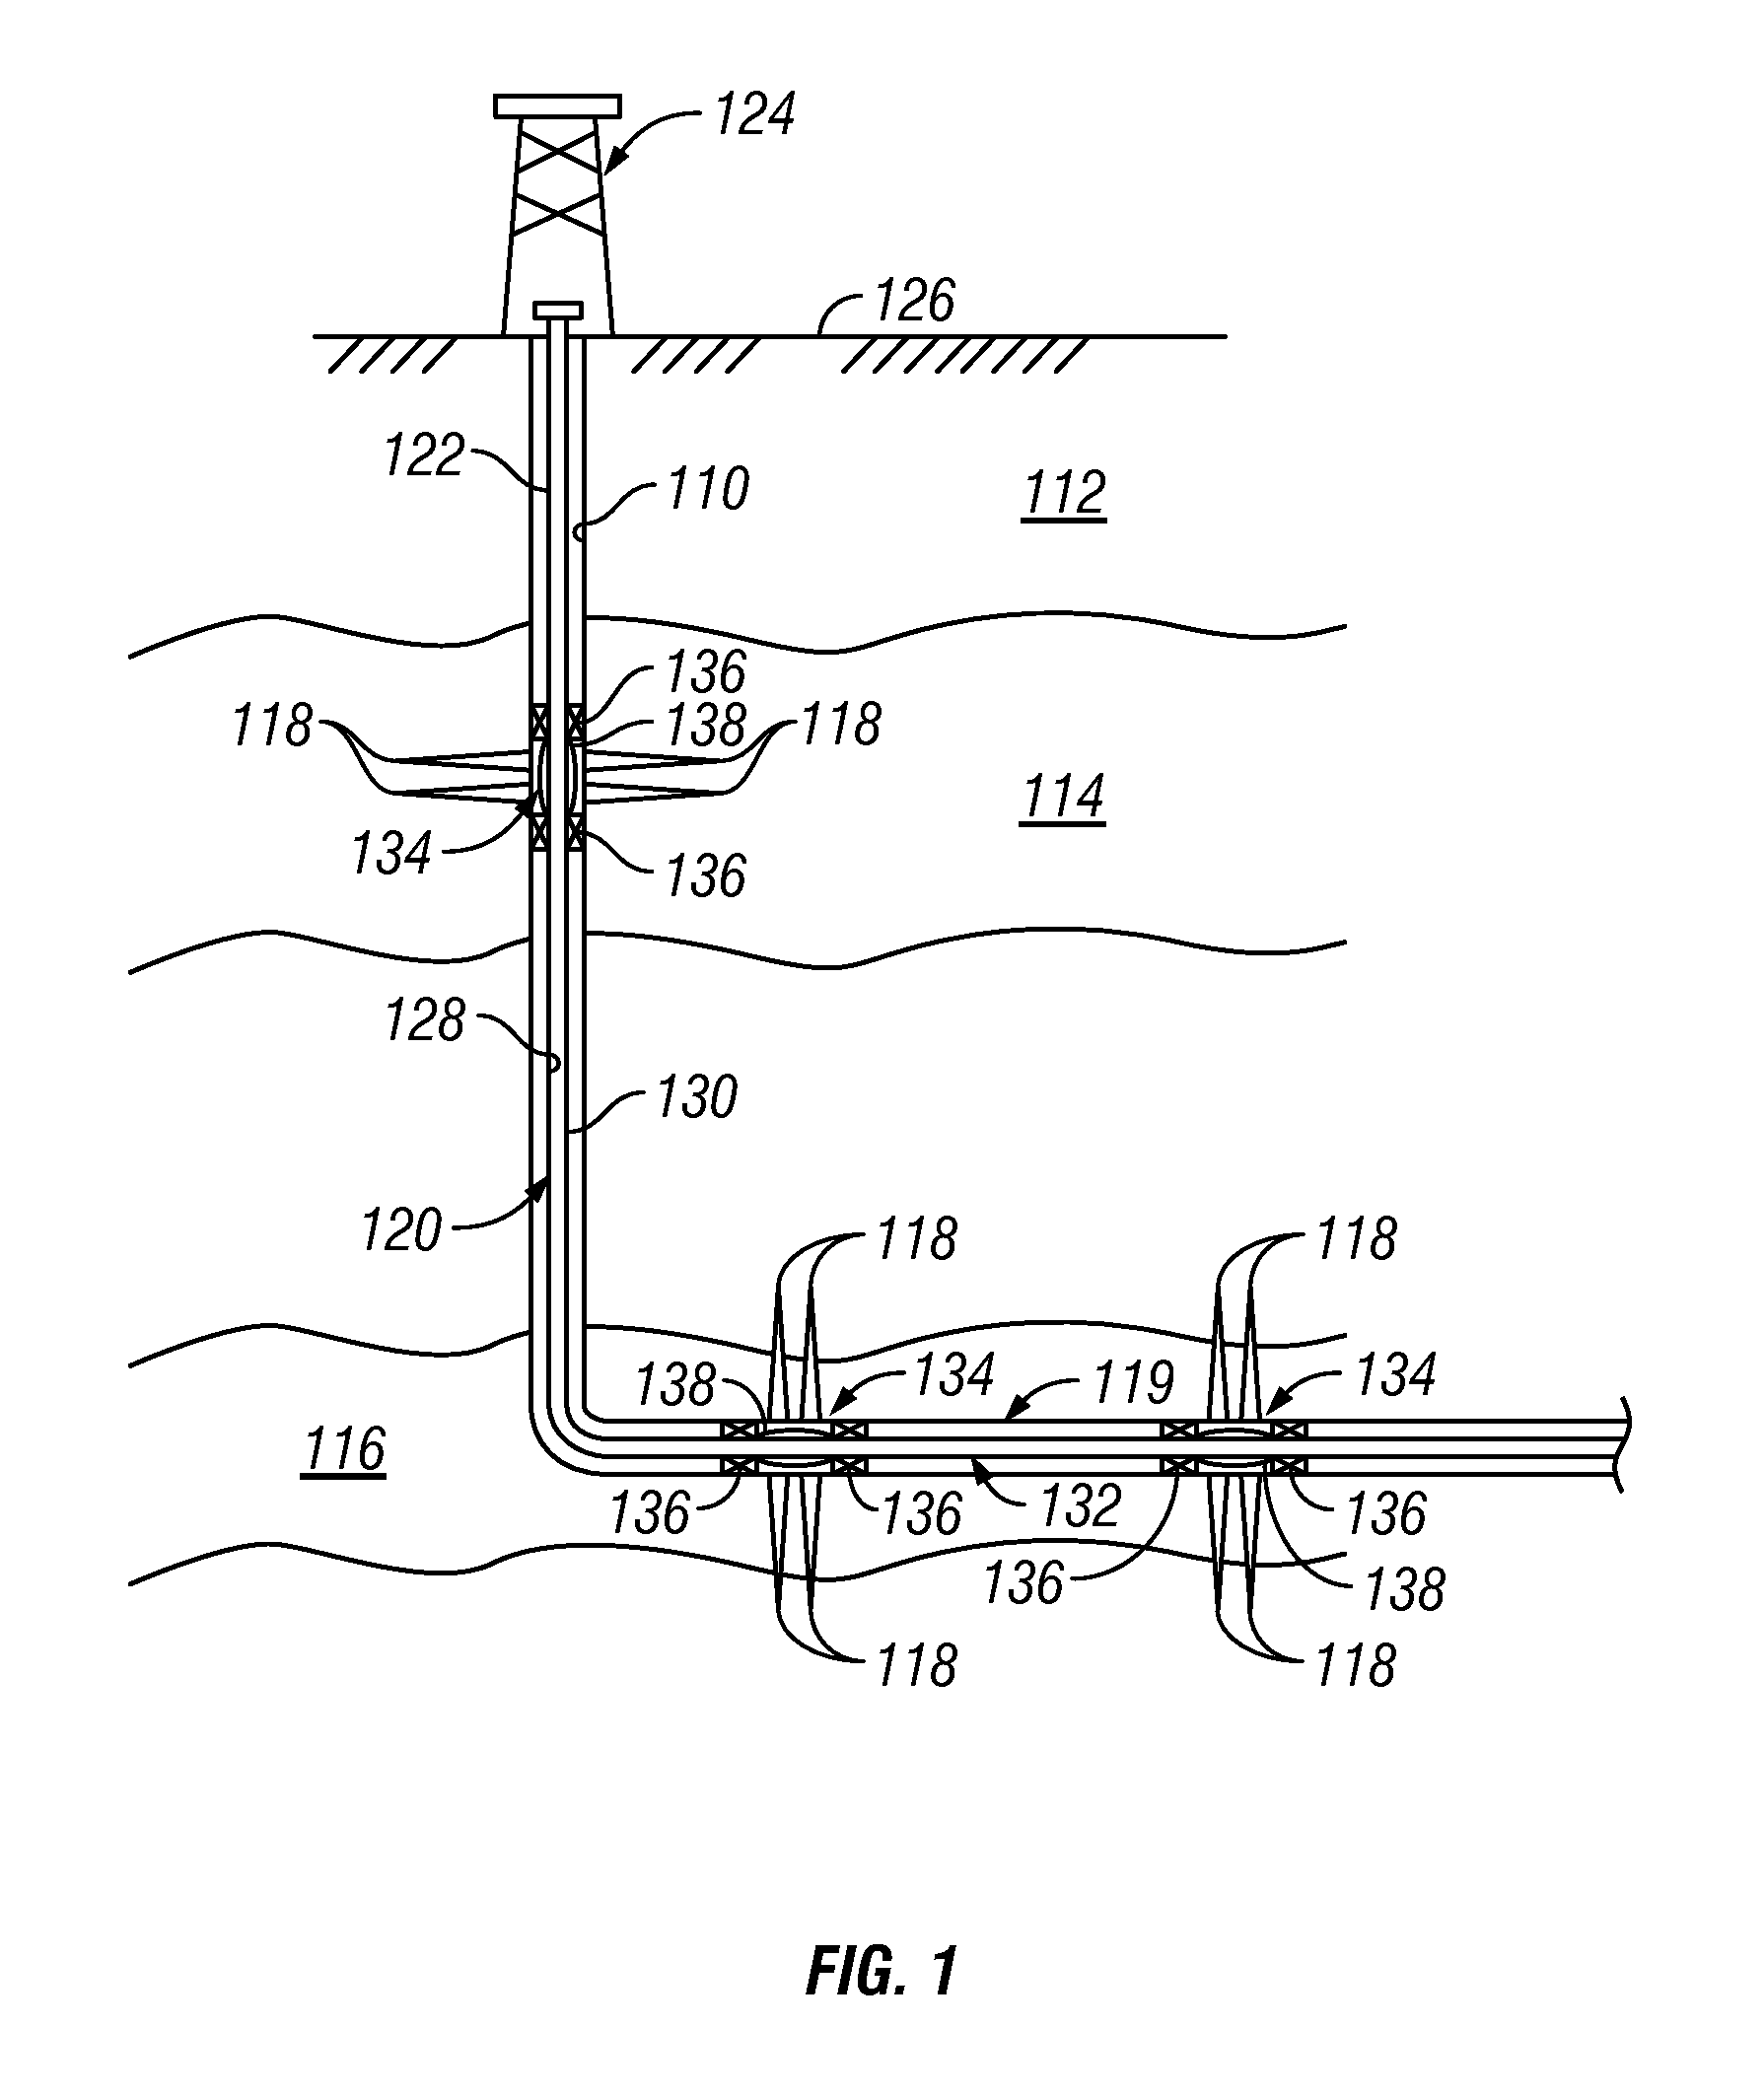 Method of Providing a Flow Control Device That Substantially Reduces Fluid Flow Between a Formation and a Wellbore When a Selected Property of the Fluid is in a Selected Range